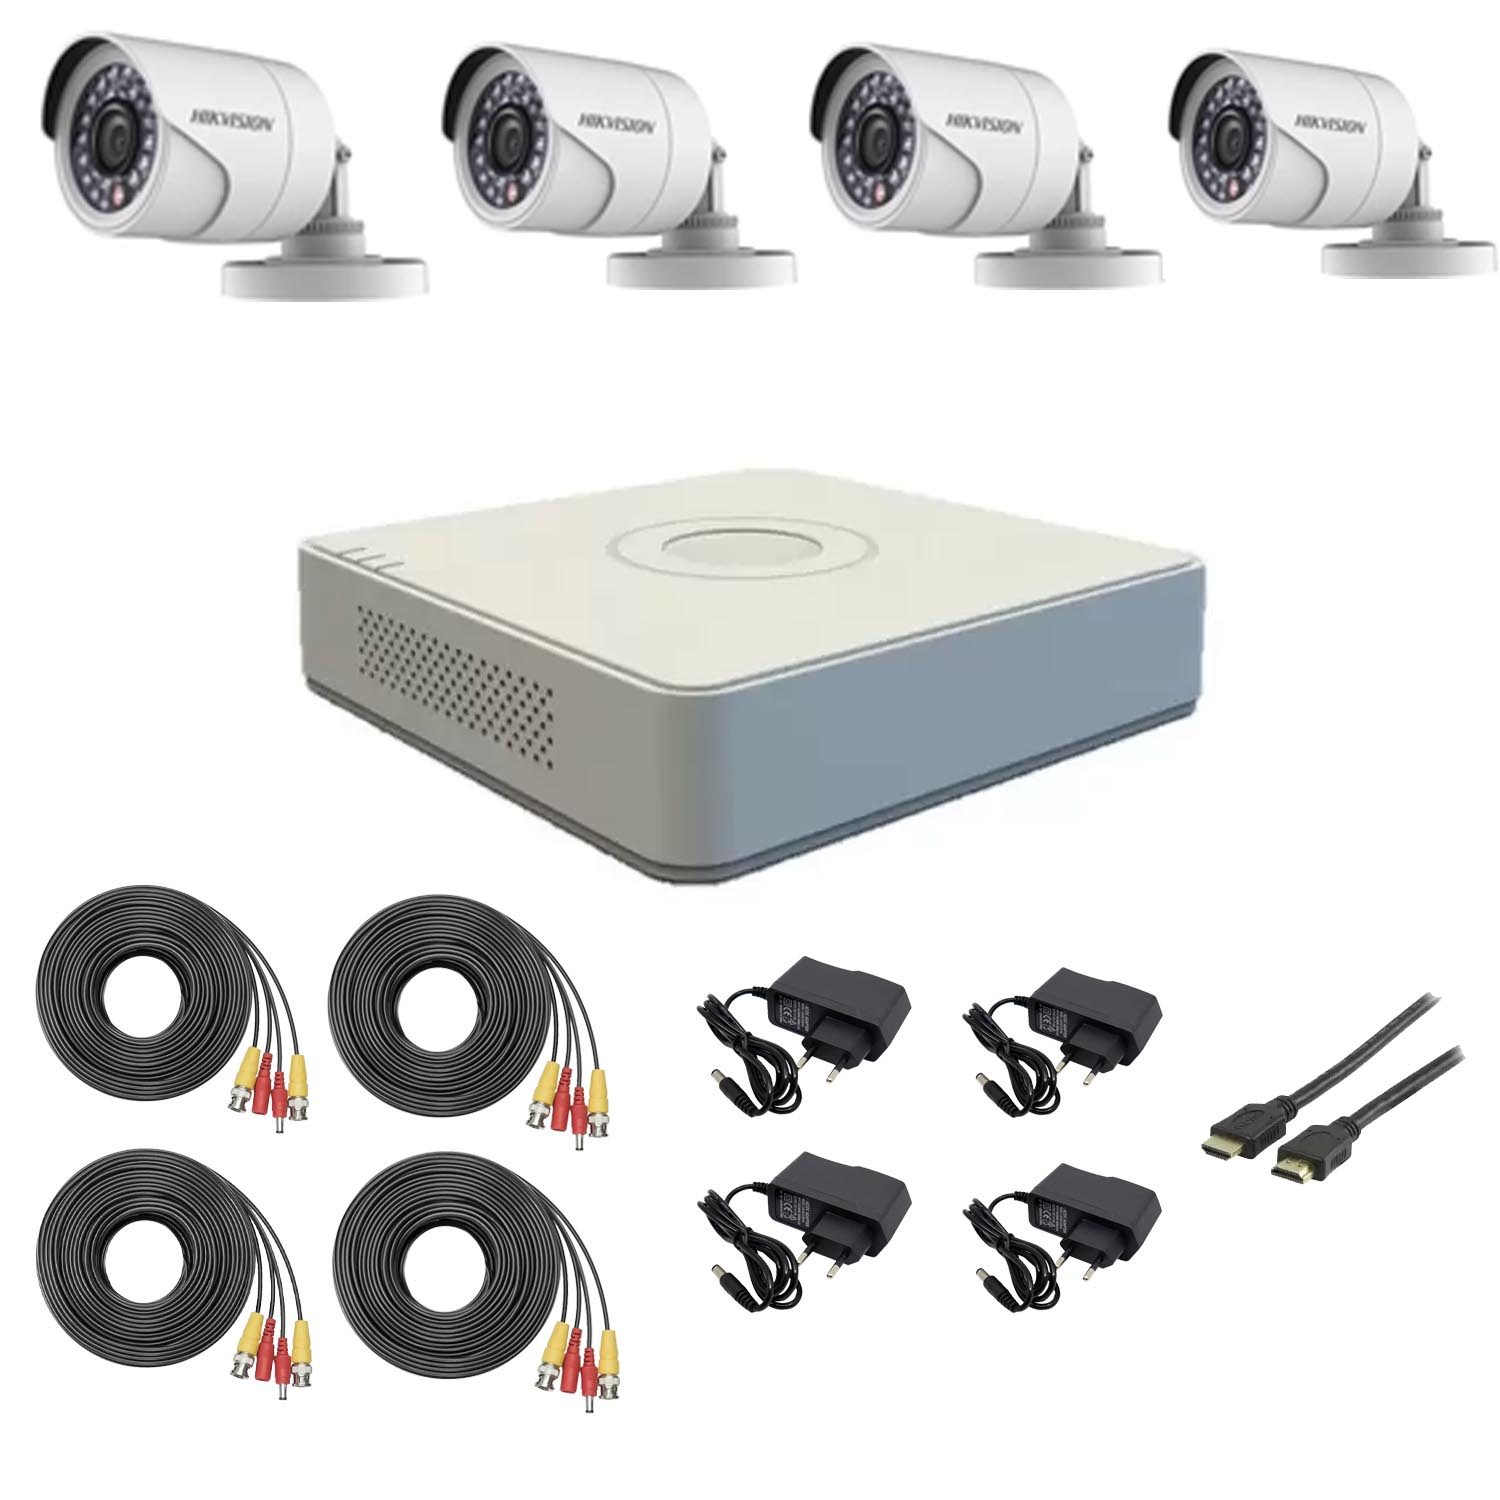 insufficient Orthodox Punctuation Kit supraveghere video 4 camere Hikvision exterior 20m IR, accesorii  incluse, soft telefon mobil , CABLU HDMI CADOU - Rovision - Camere  Supraveghere, Sisteme Alarma, Video Interfoane